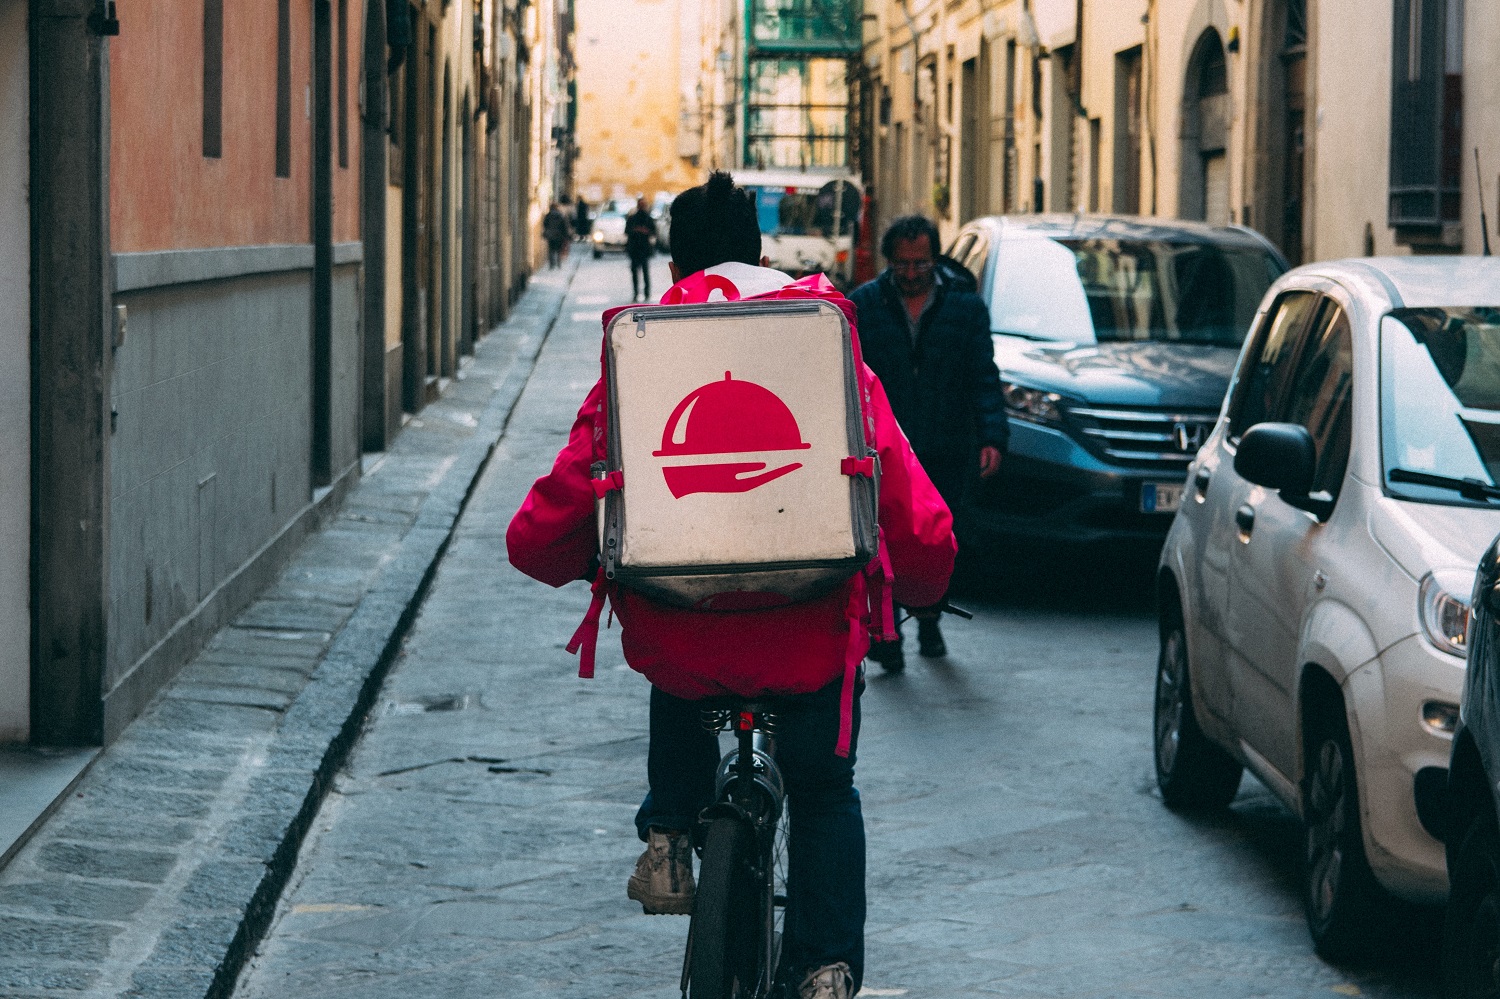 Urban mobility and food delivery options